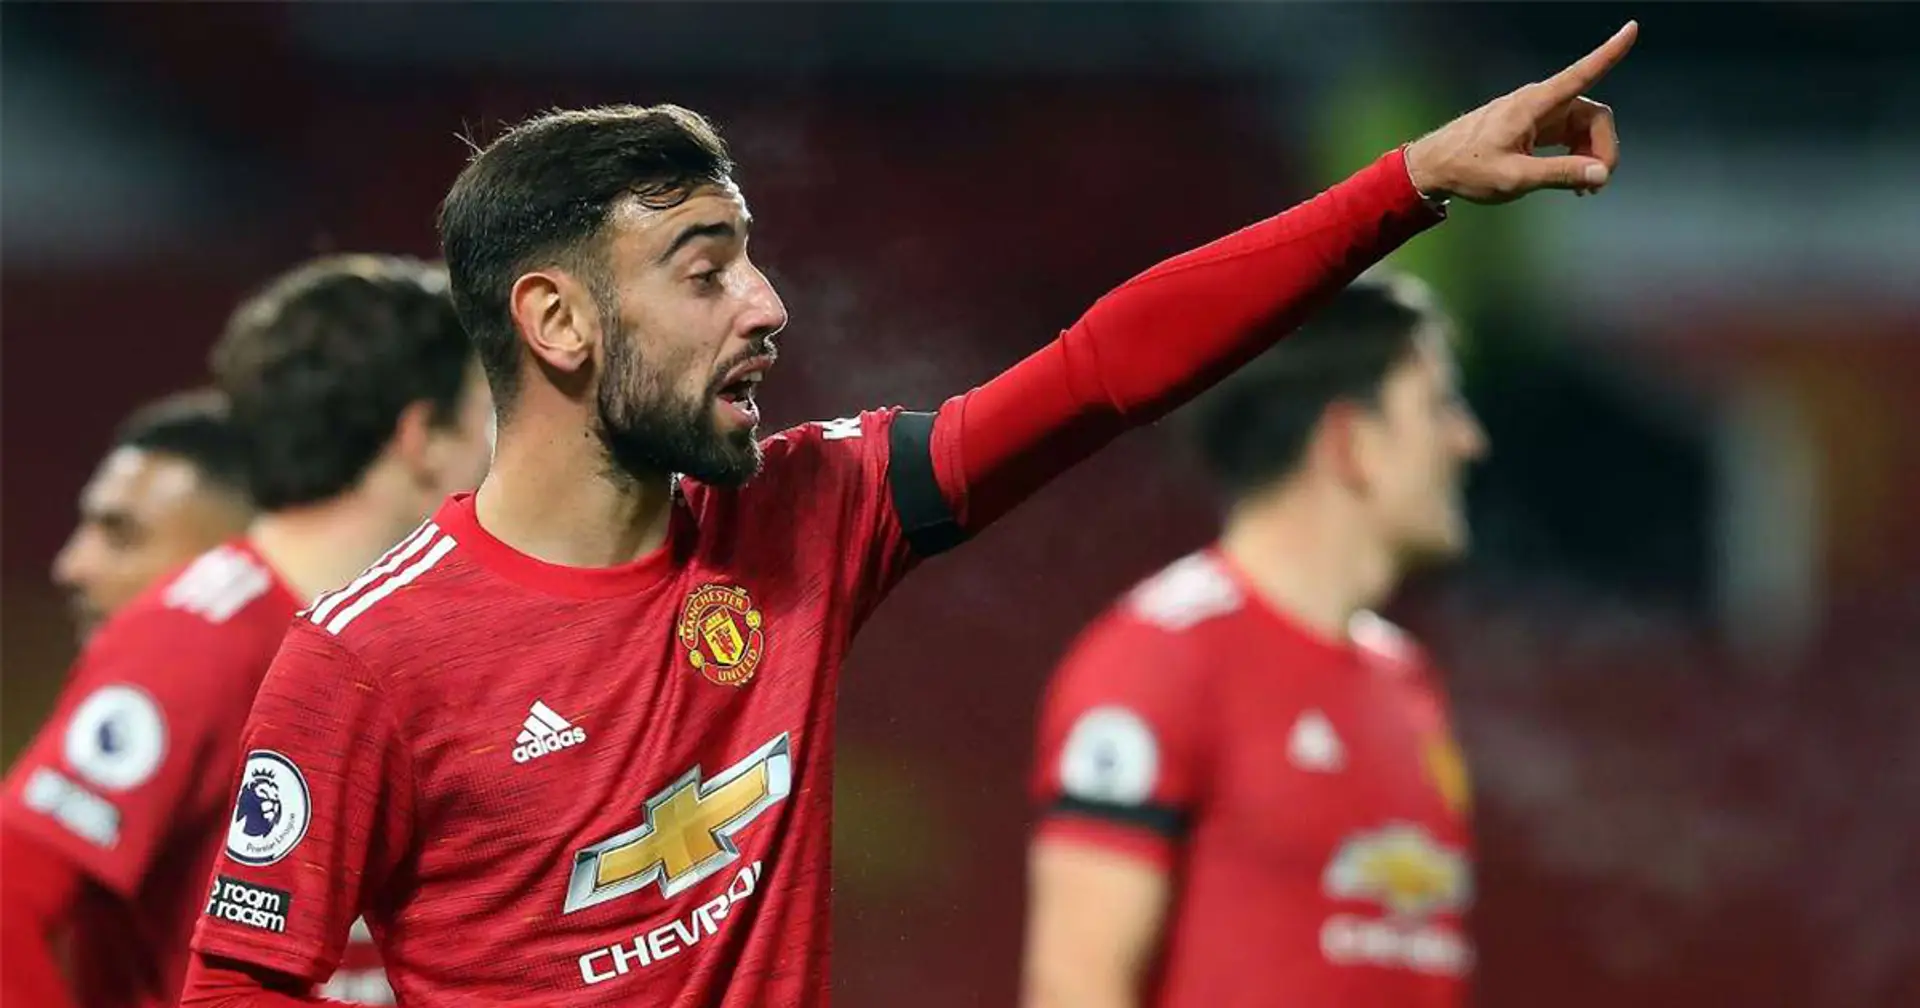 Magnifico: Bruno Fernandes' mins-per-goal/assist stat sees massive improvement since first day at United